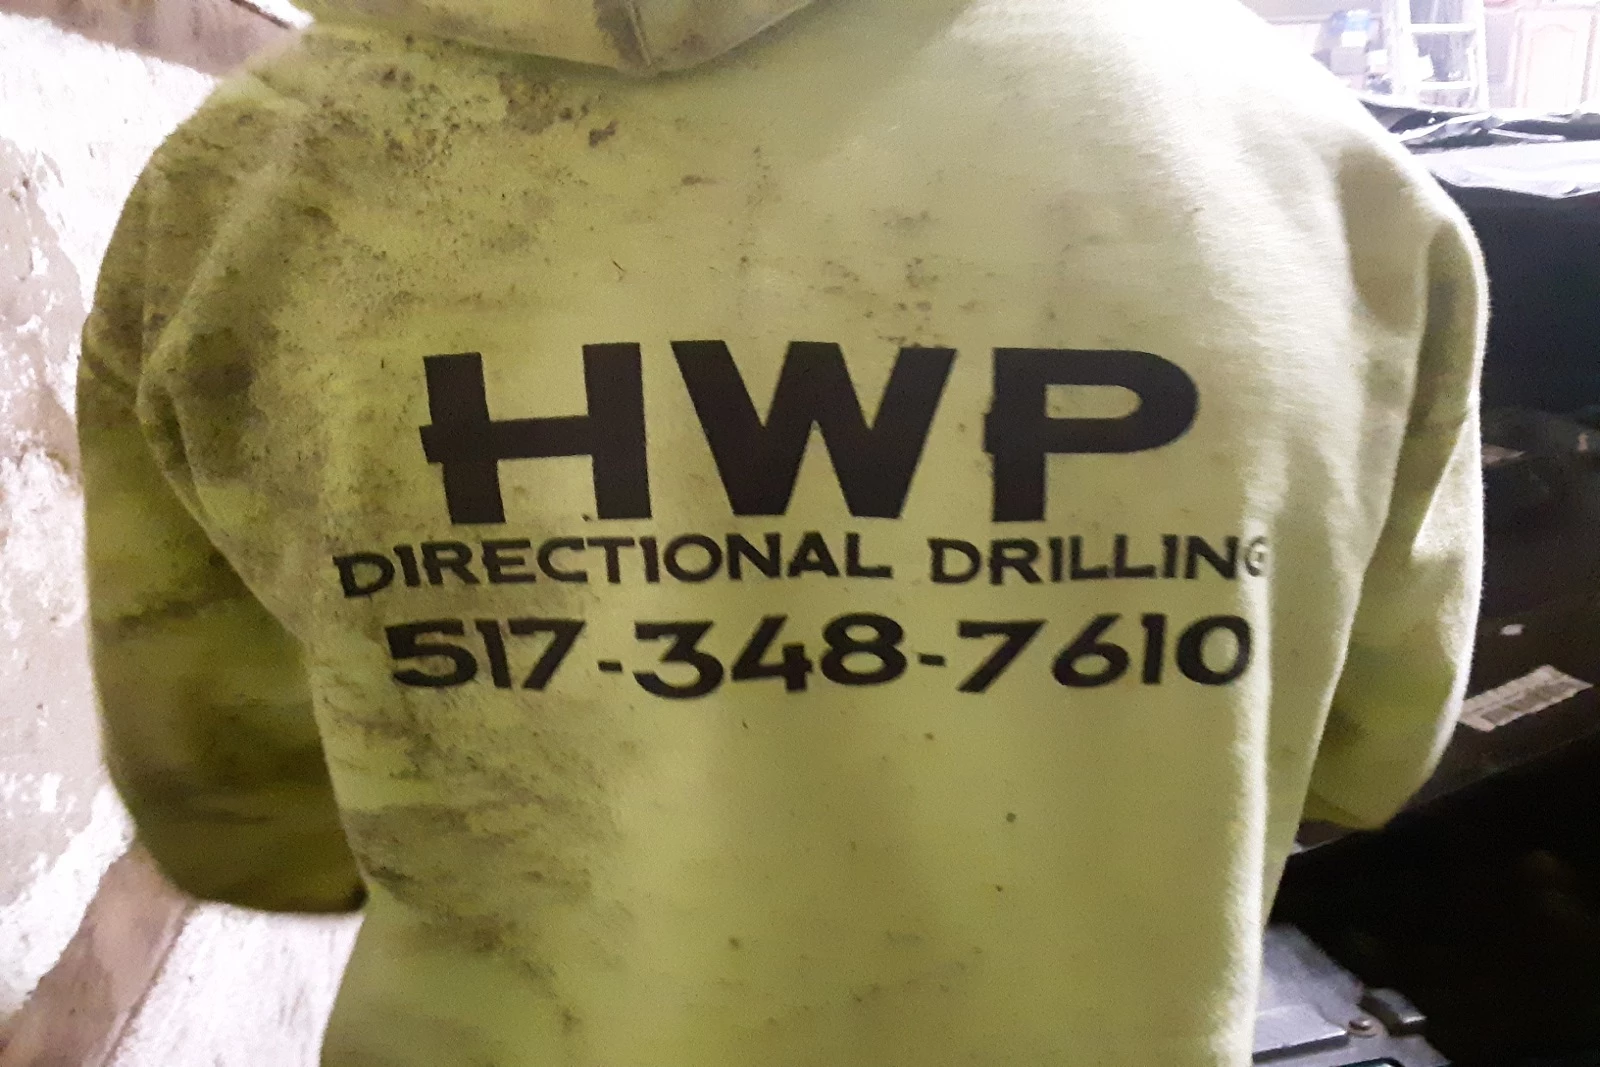 spartan directional drilling